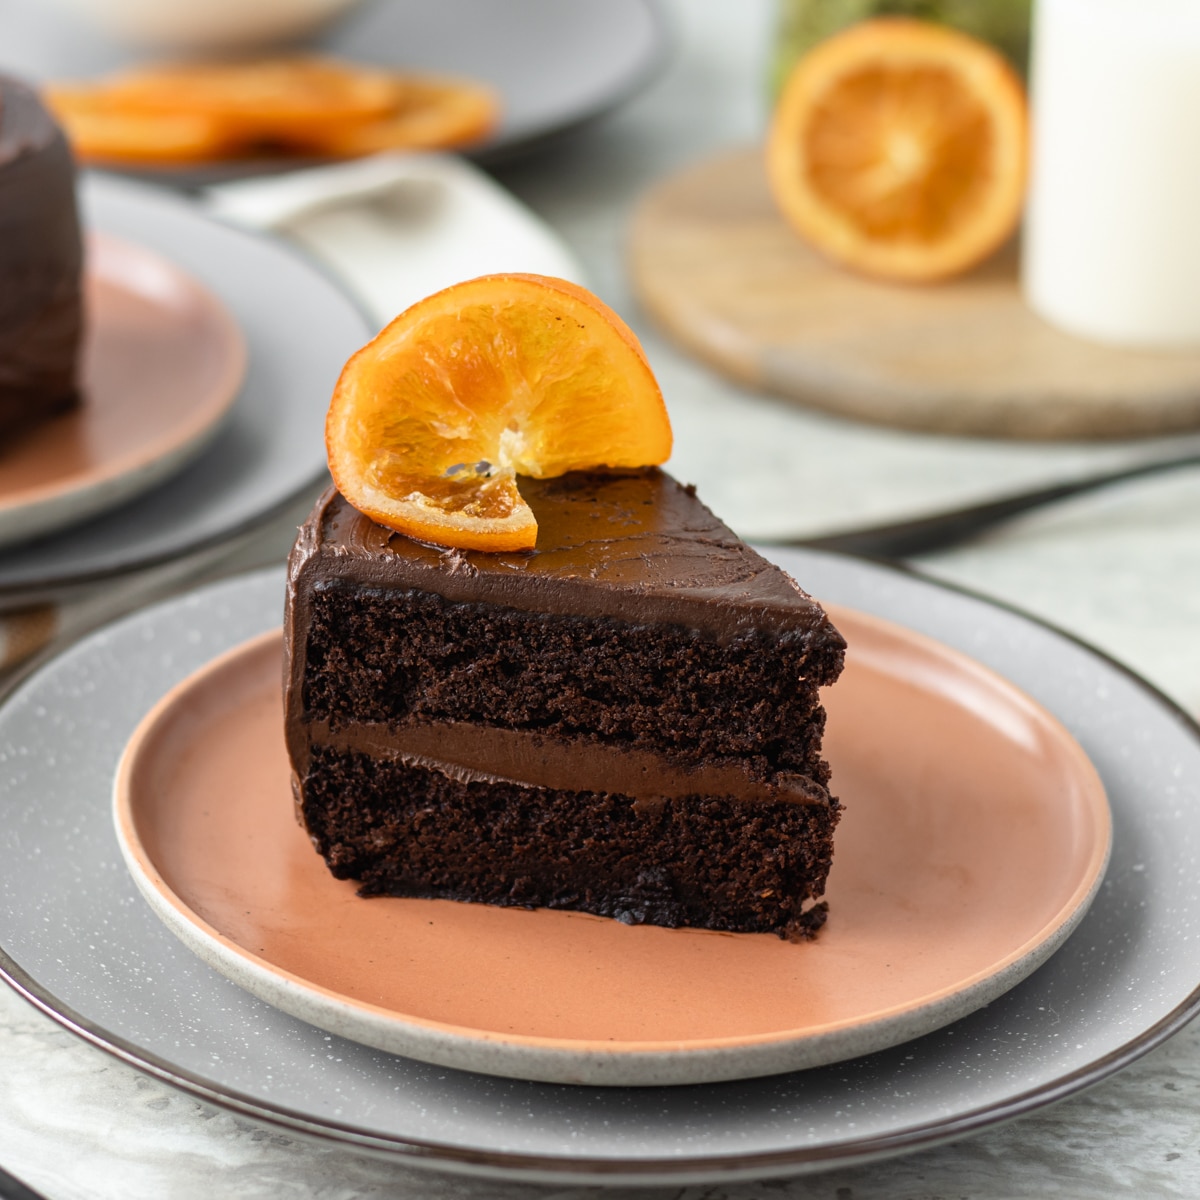 Slice of Chocolate Orange Cake with another mini cake and candied orange slices in the background.